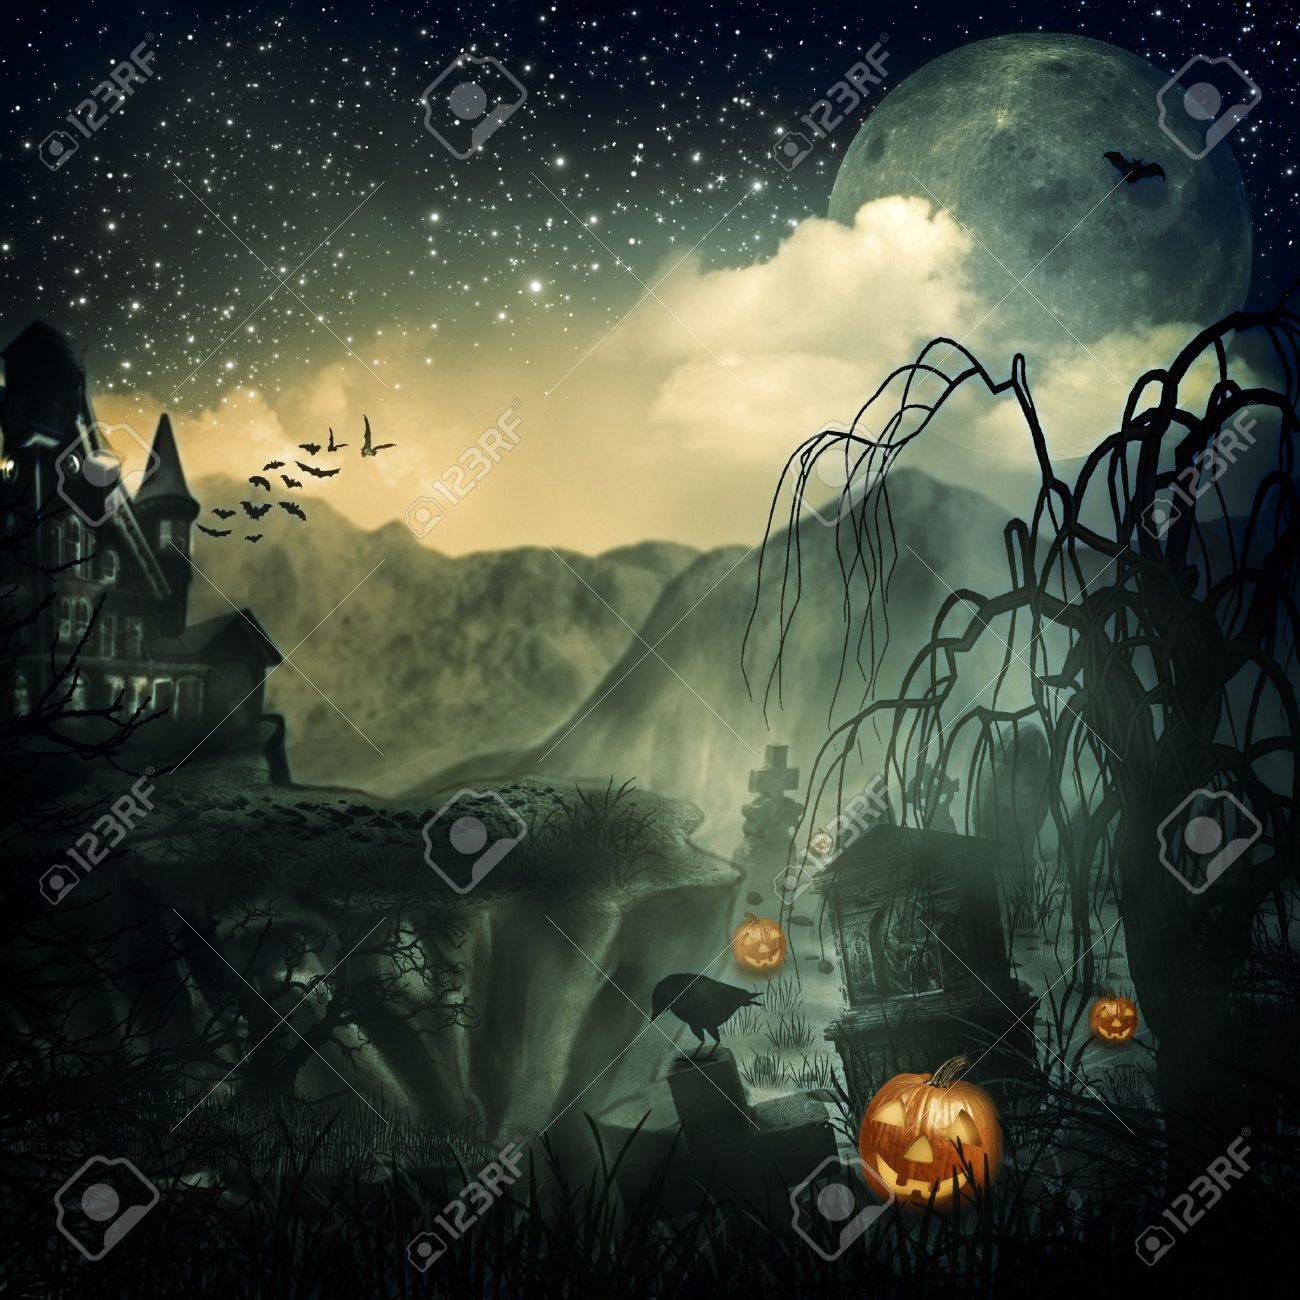 Scary Movie Abstract Halloween Background For Your Design Stock